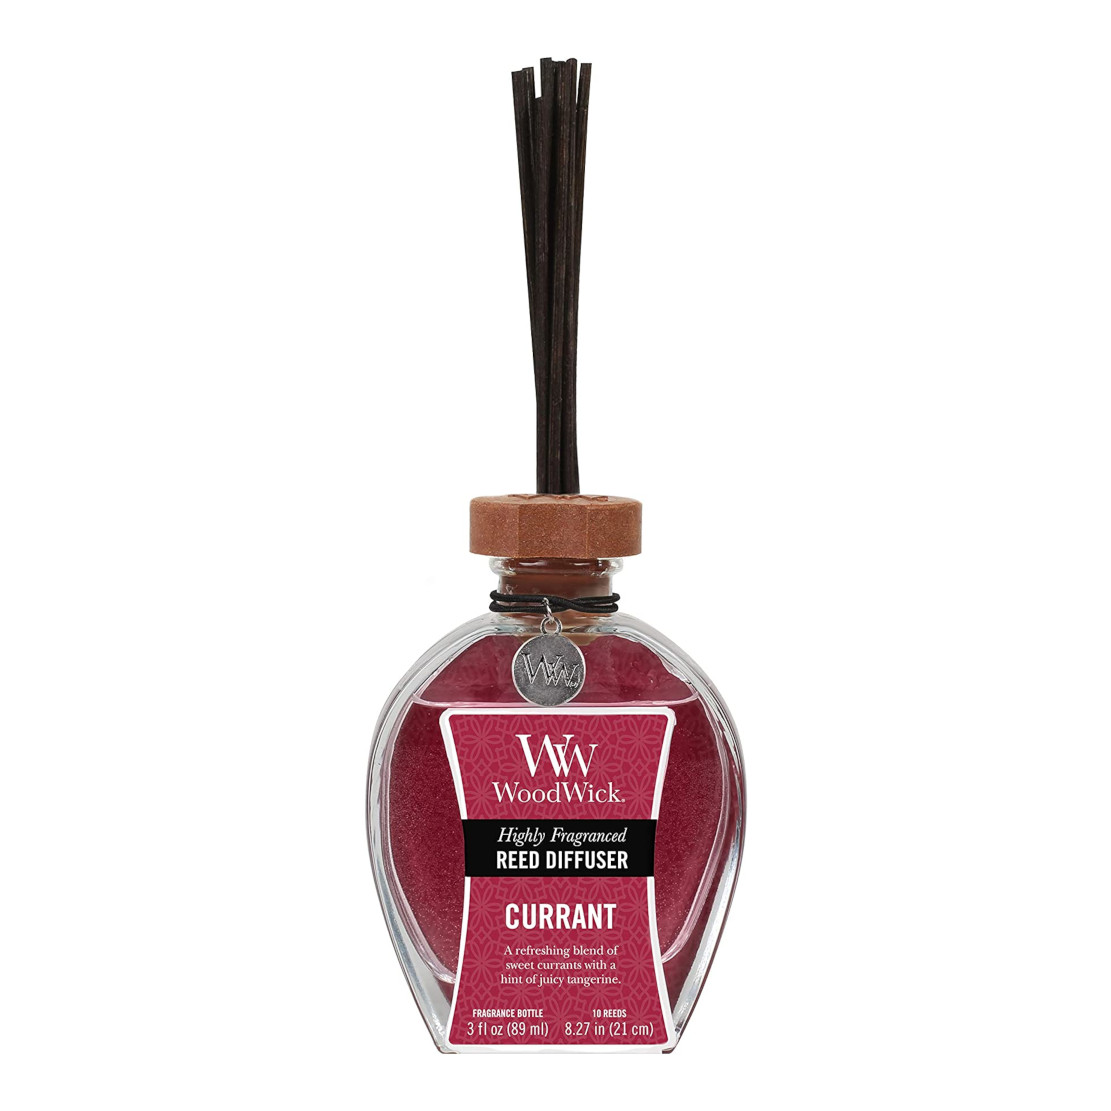 Woodwick Currant Reed Diffuser